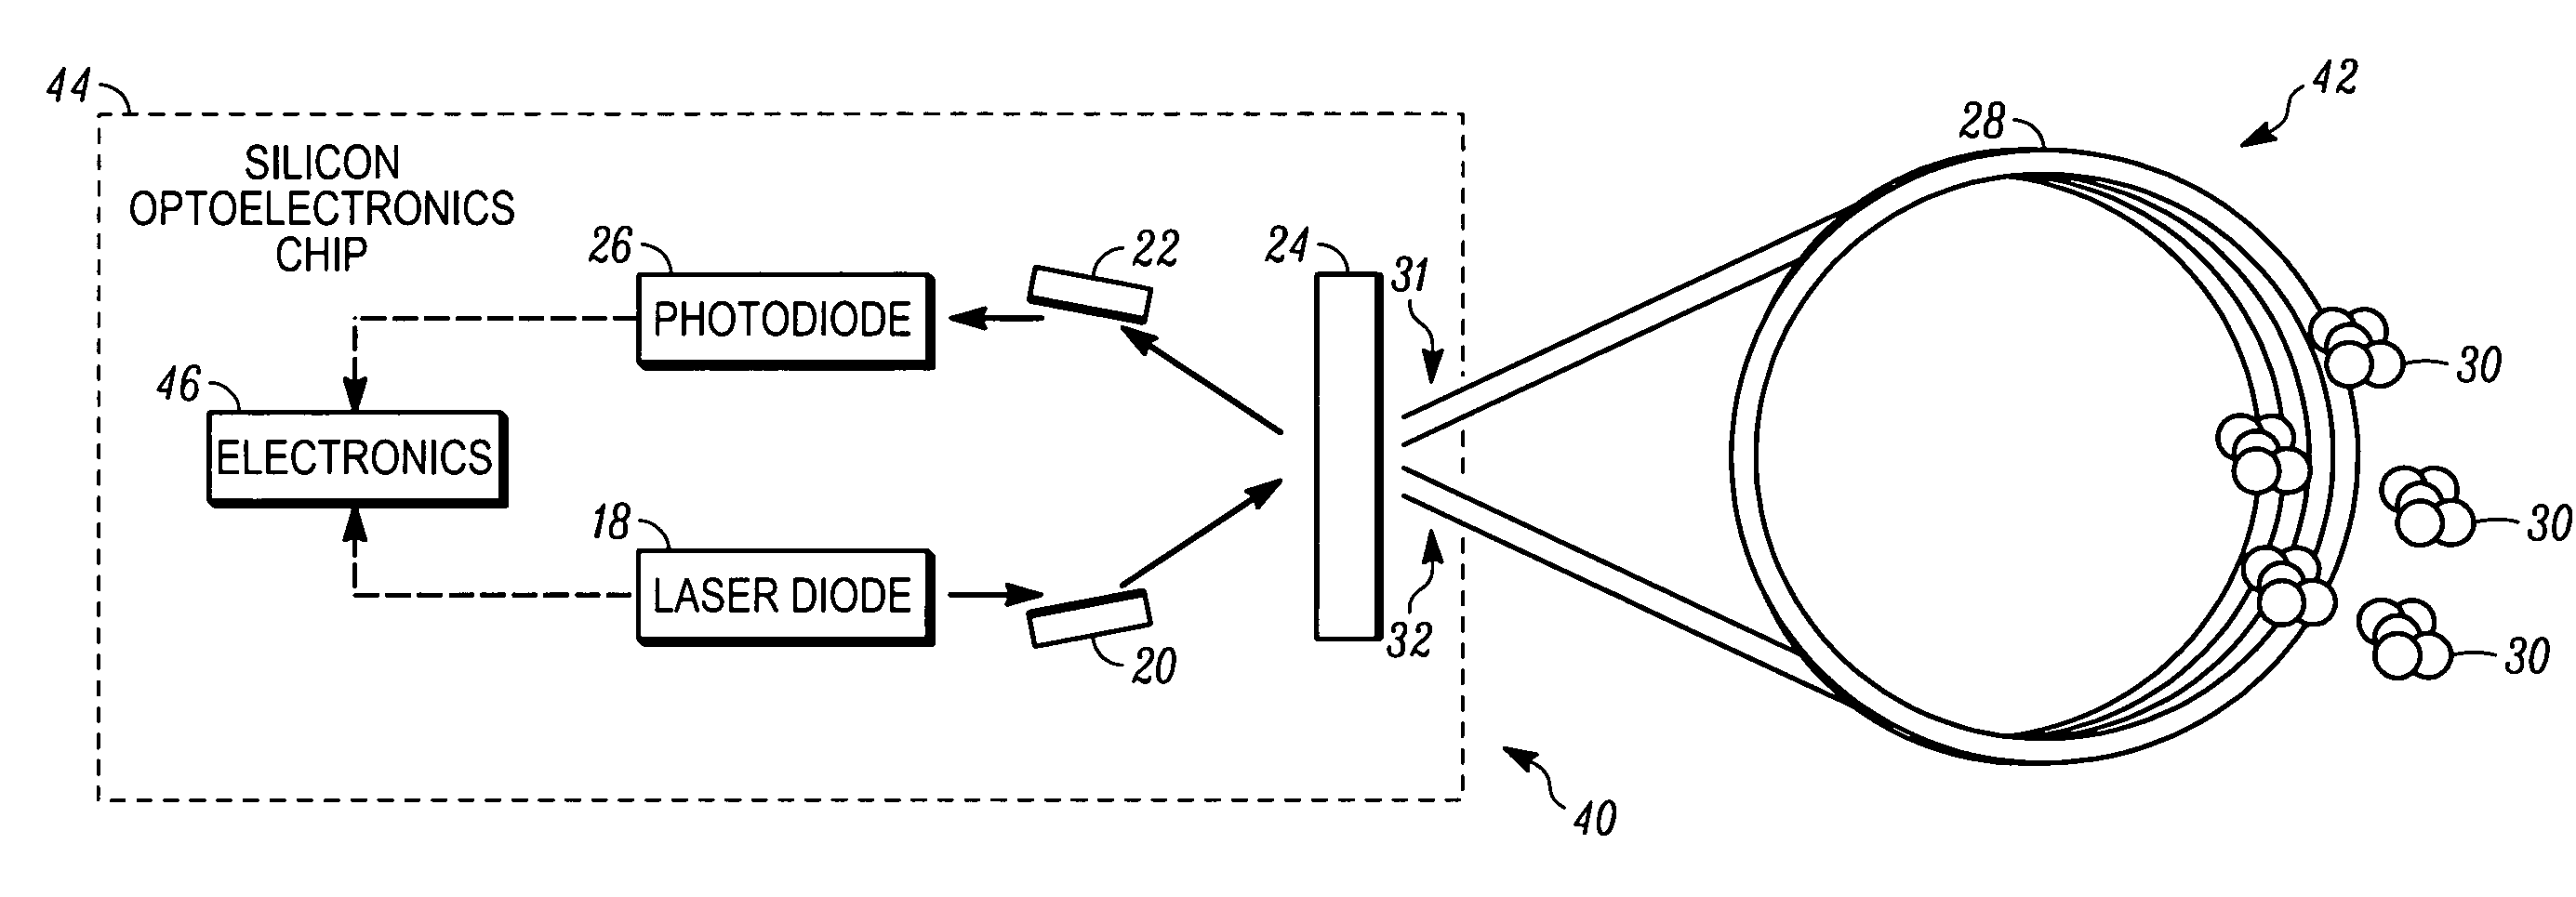 Apparatus and method for resonant chemical and biological sensing